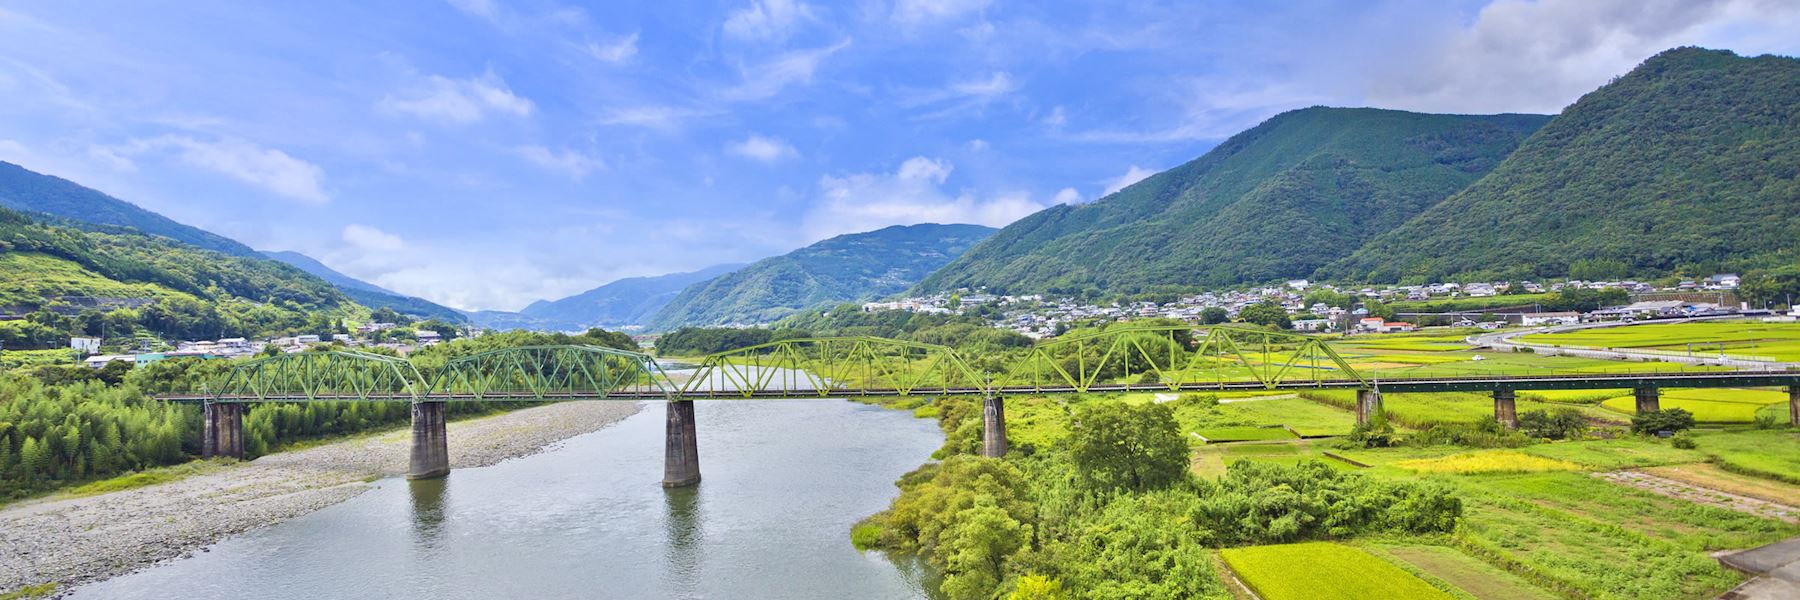 Visit Iya Valley On A Trip To Japan Audley Travel - 